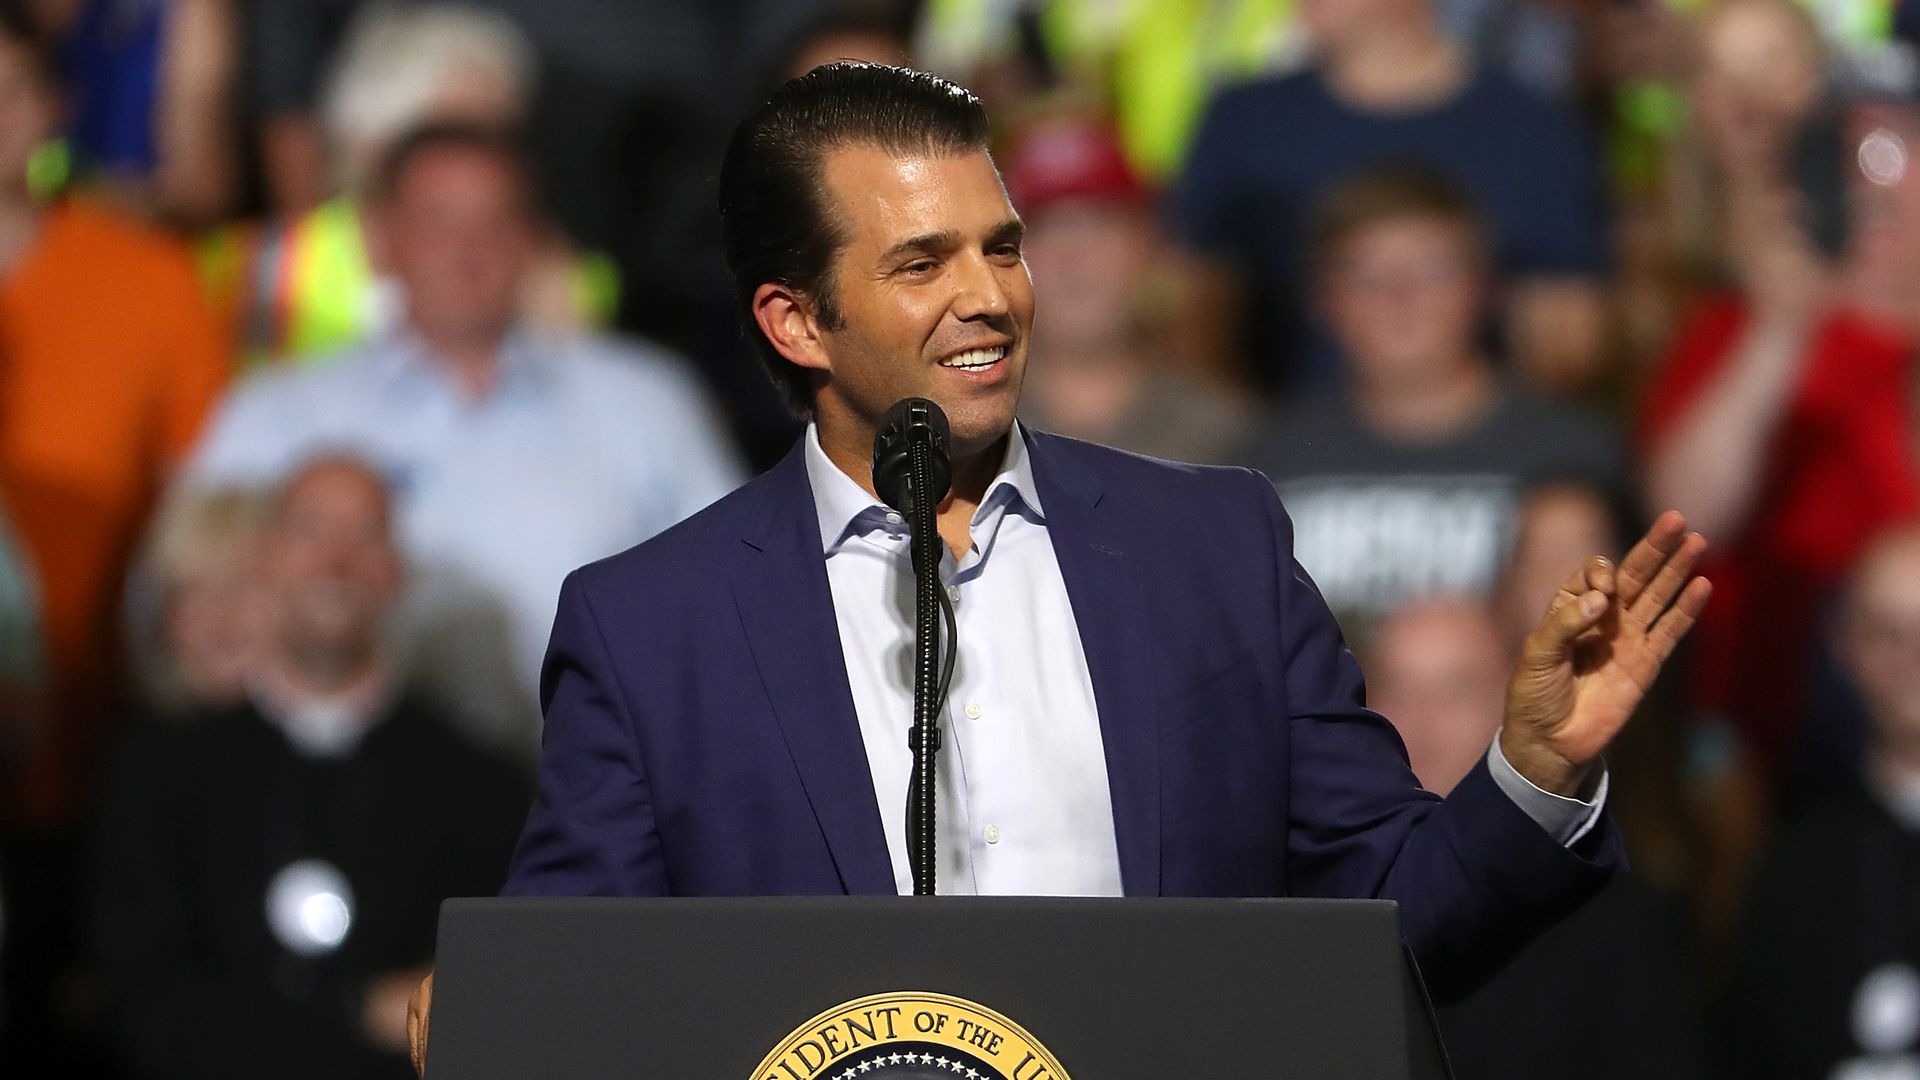 Donald Trump Jr. speaking at a campaign rally